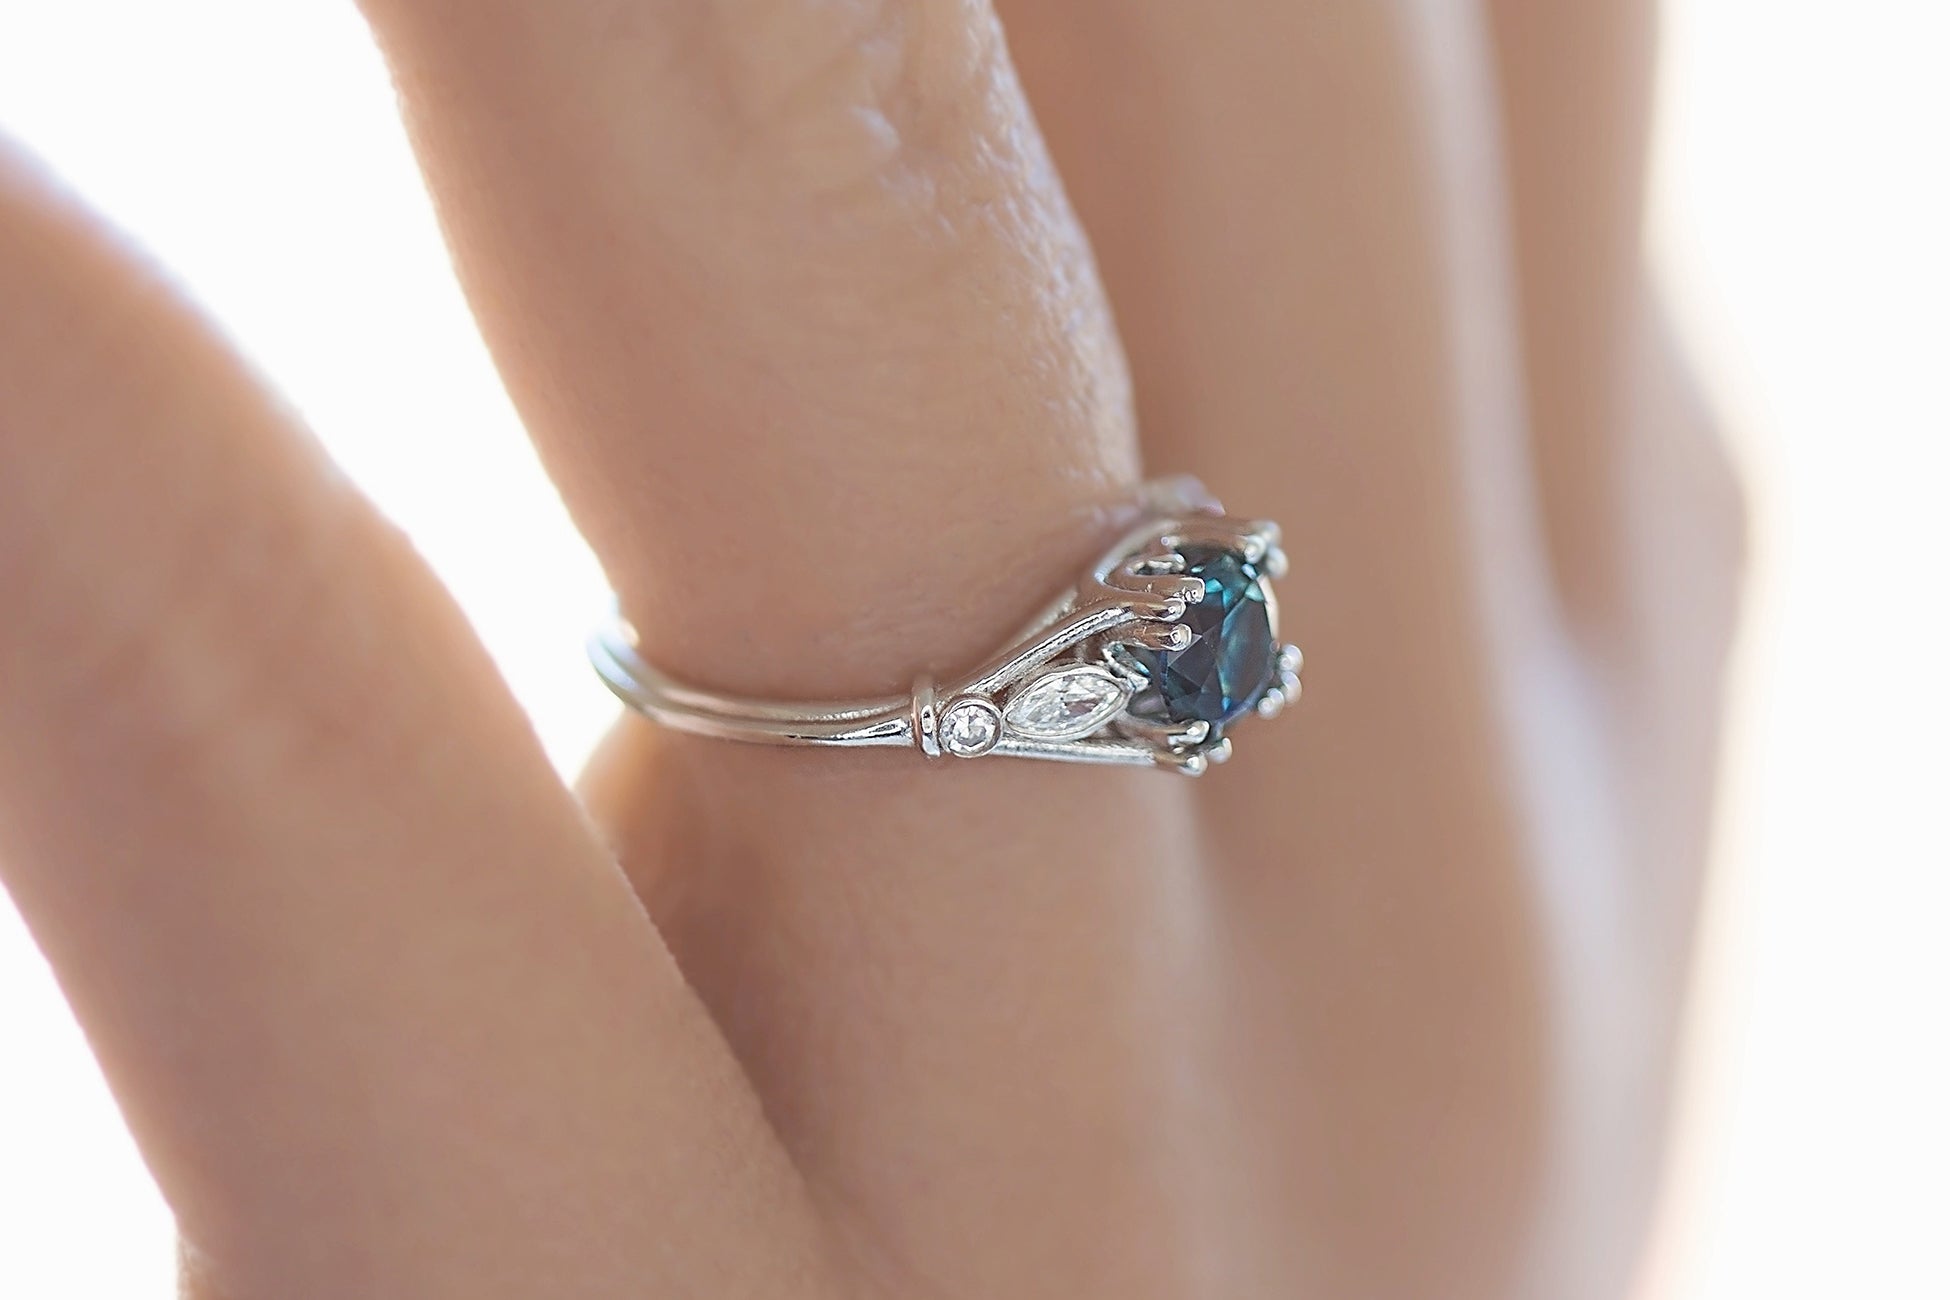 Recycled Platinum Wisping Teal Montana Sapphire Ring